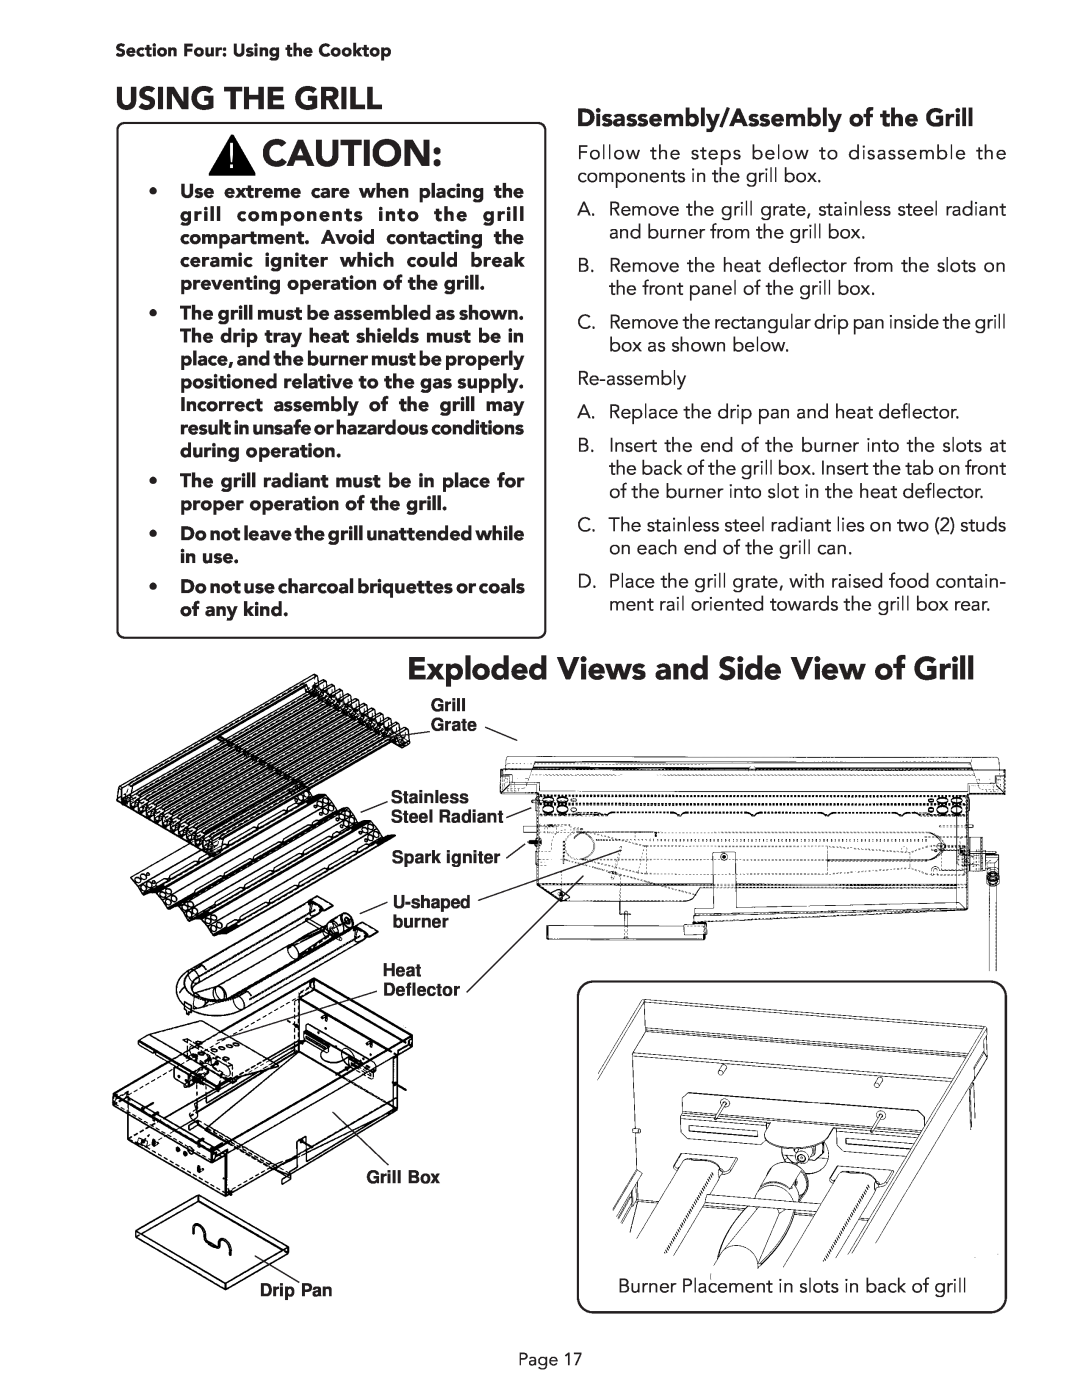 Thermador PSC484GG, PSC366 manual Exploded Views and Side View of Grill, Disassembly/Assembly of the Grill, Using The Grill 